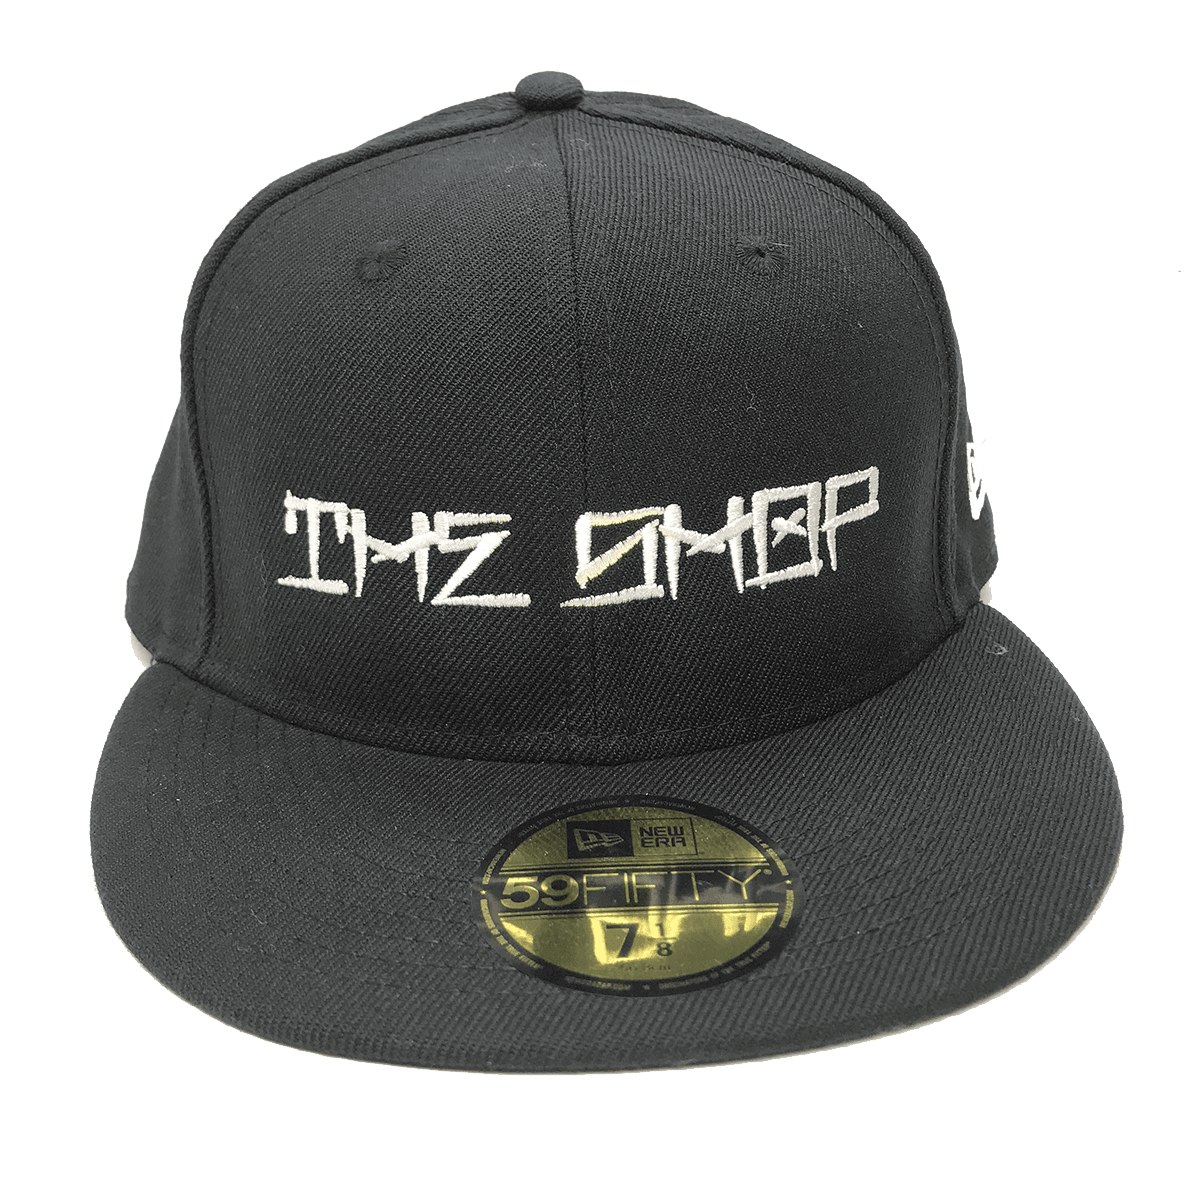 The Shop X New Era Fitted Hat |HATS |$29.99 |TSP The Shop | The Shop X New Era Fitted Hat | The Shop Pro Scooter Lab